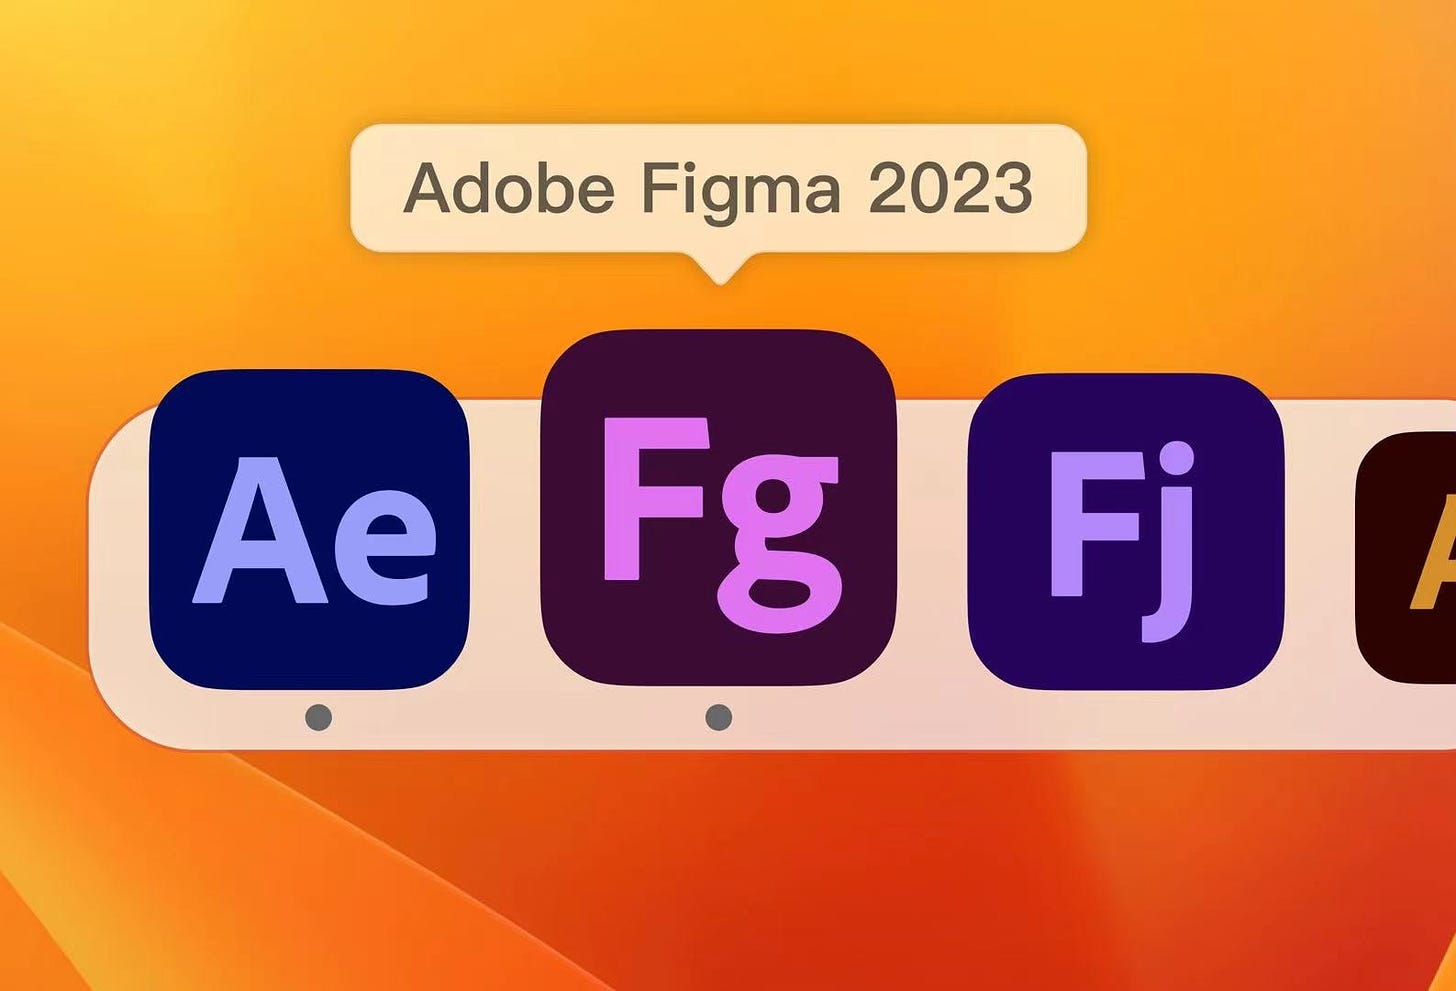 Internet meme about Figma being acquired by Adobe